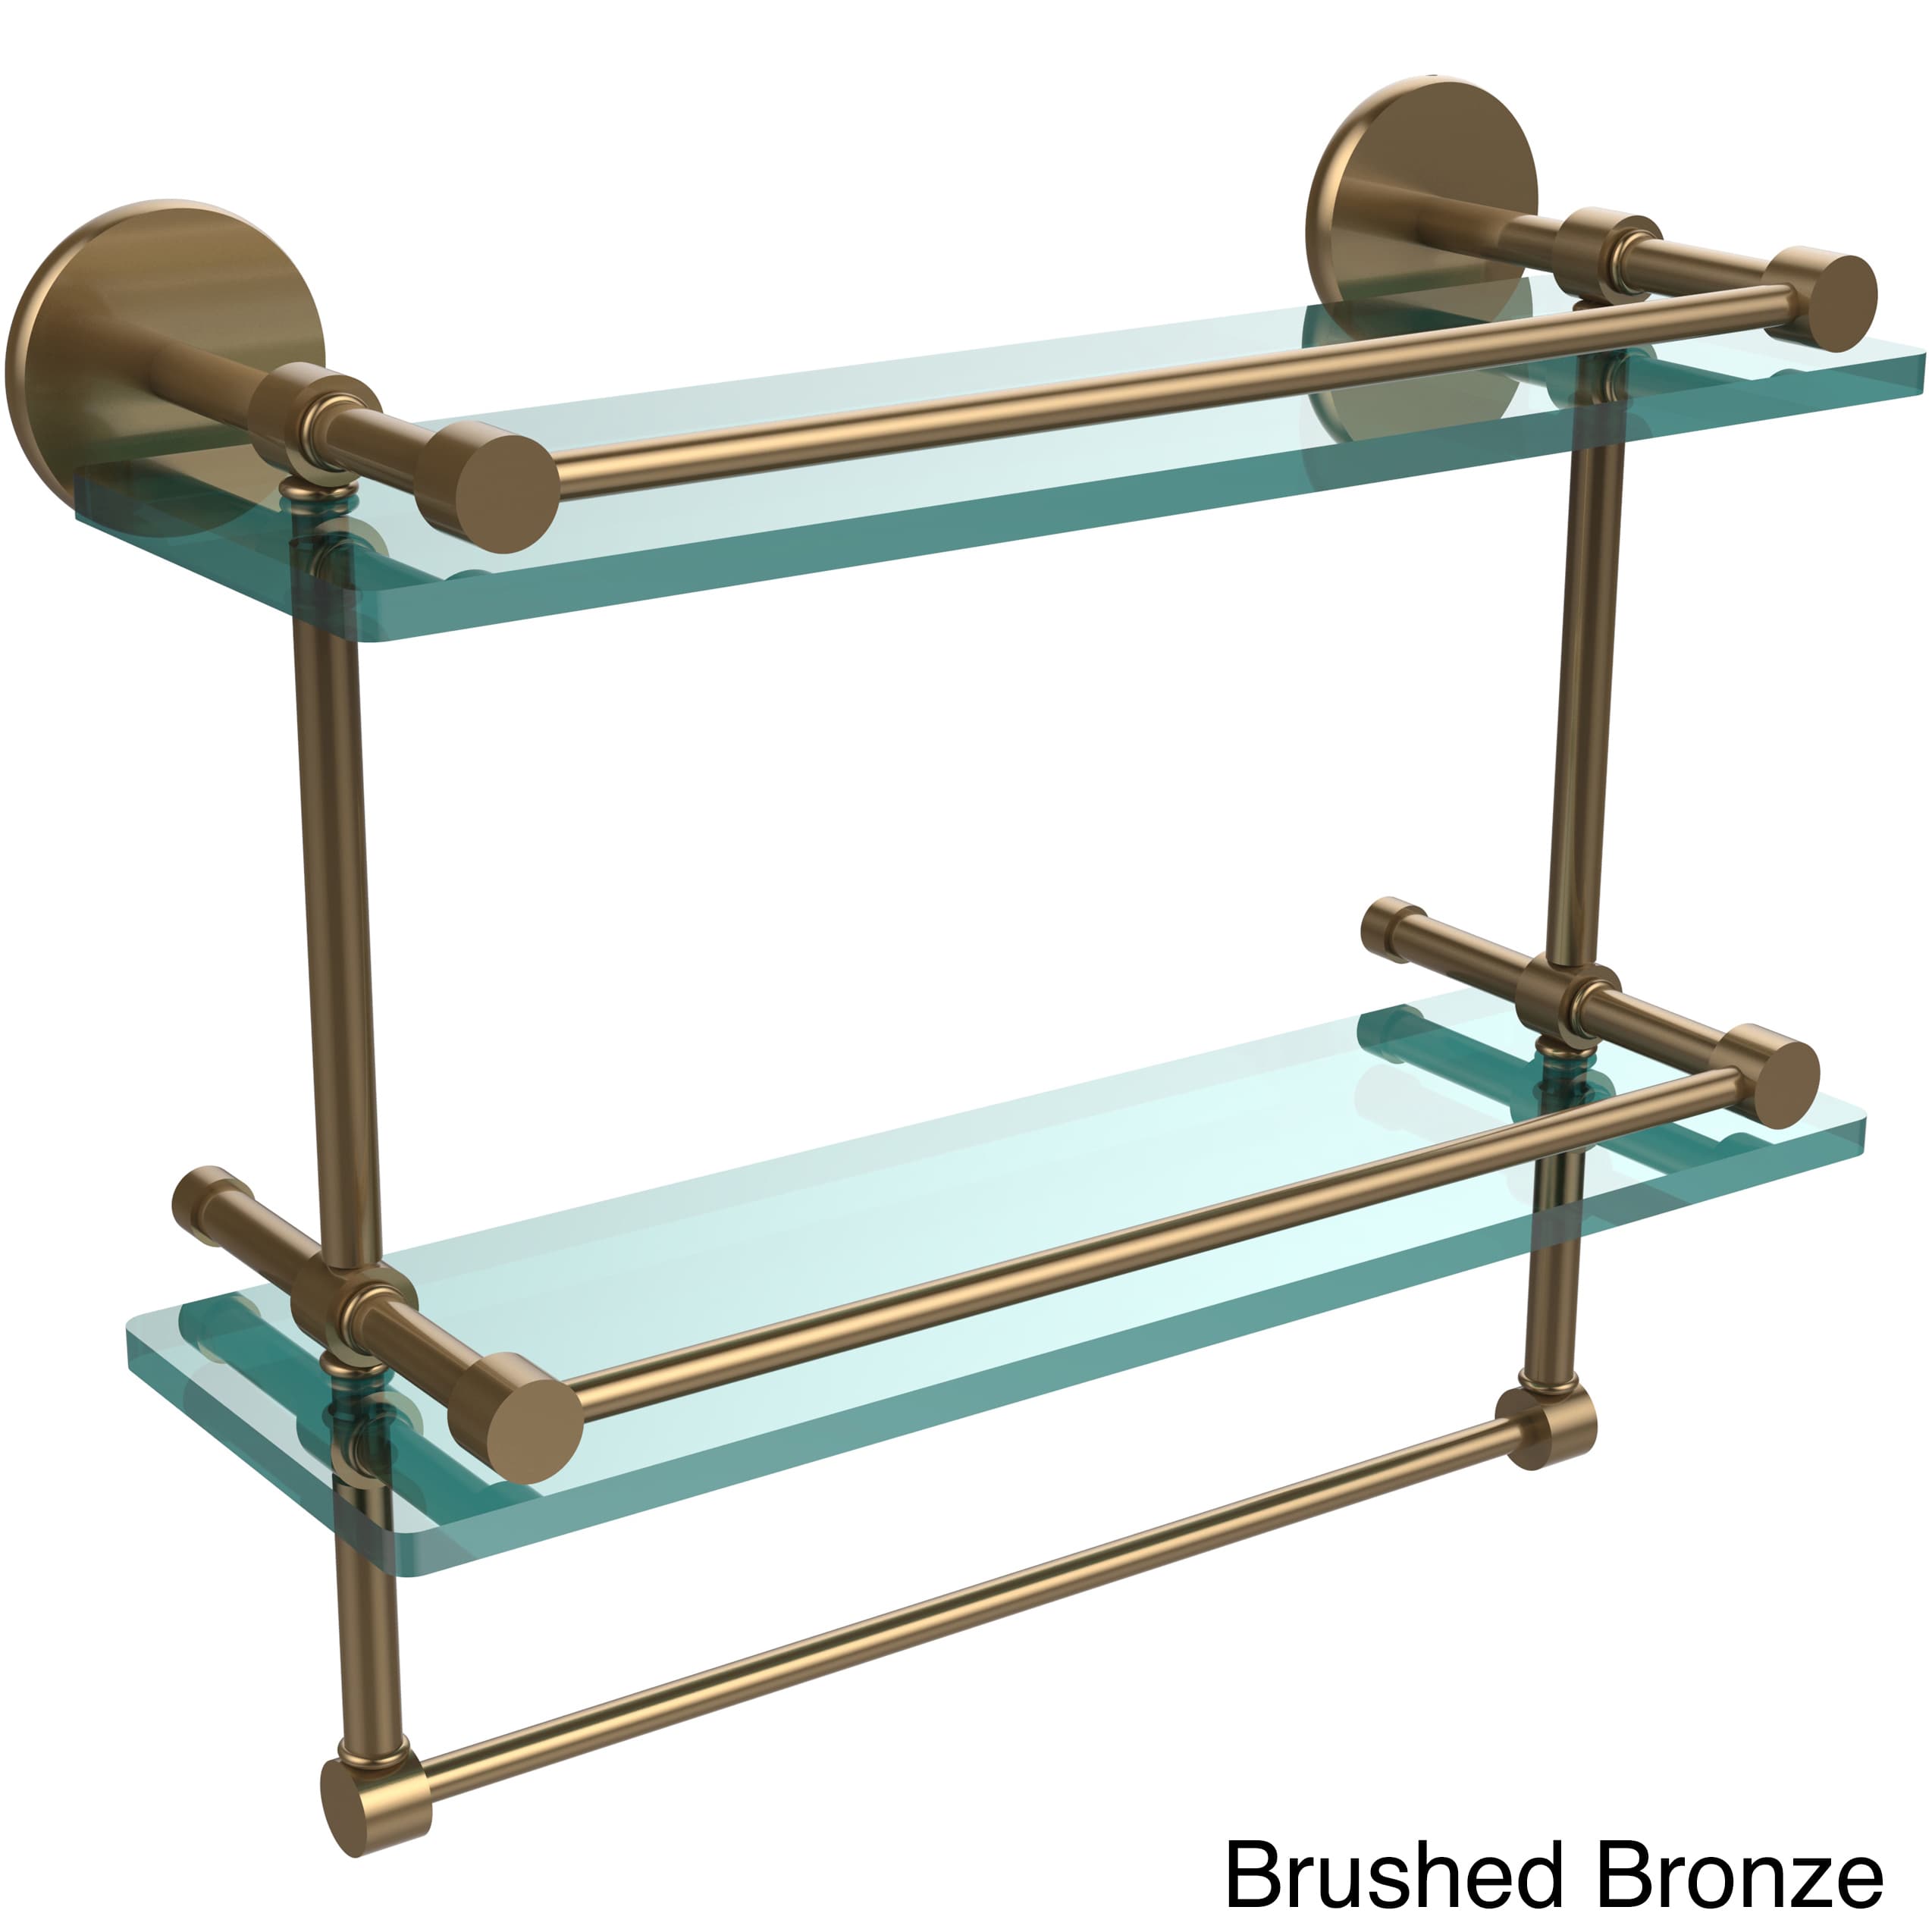 16 Inch Gallery Double Glass Shelf with Towel Bar - P1000-2TB/16-GAL-PC - image 4 of 5